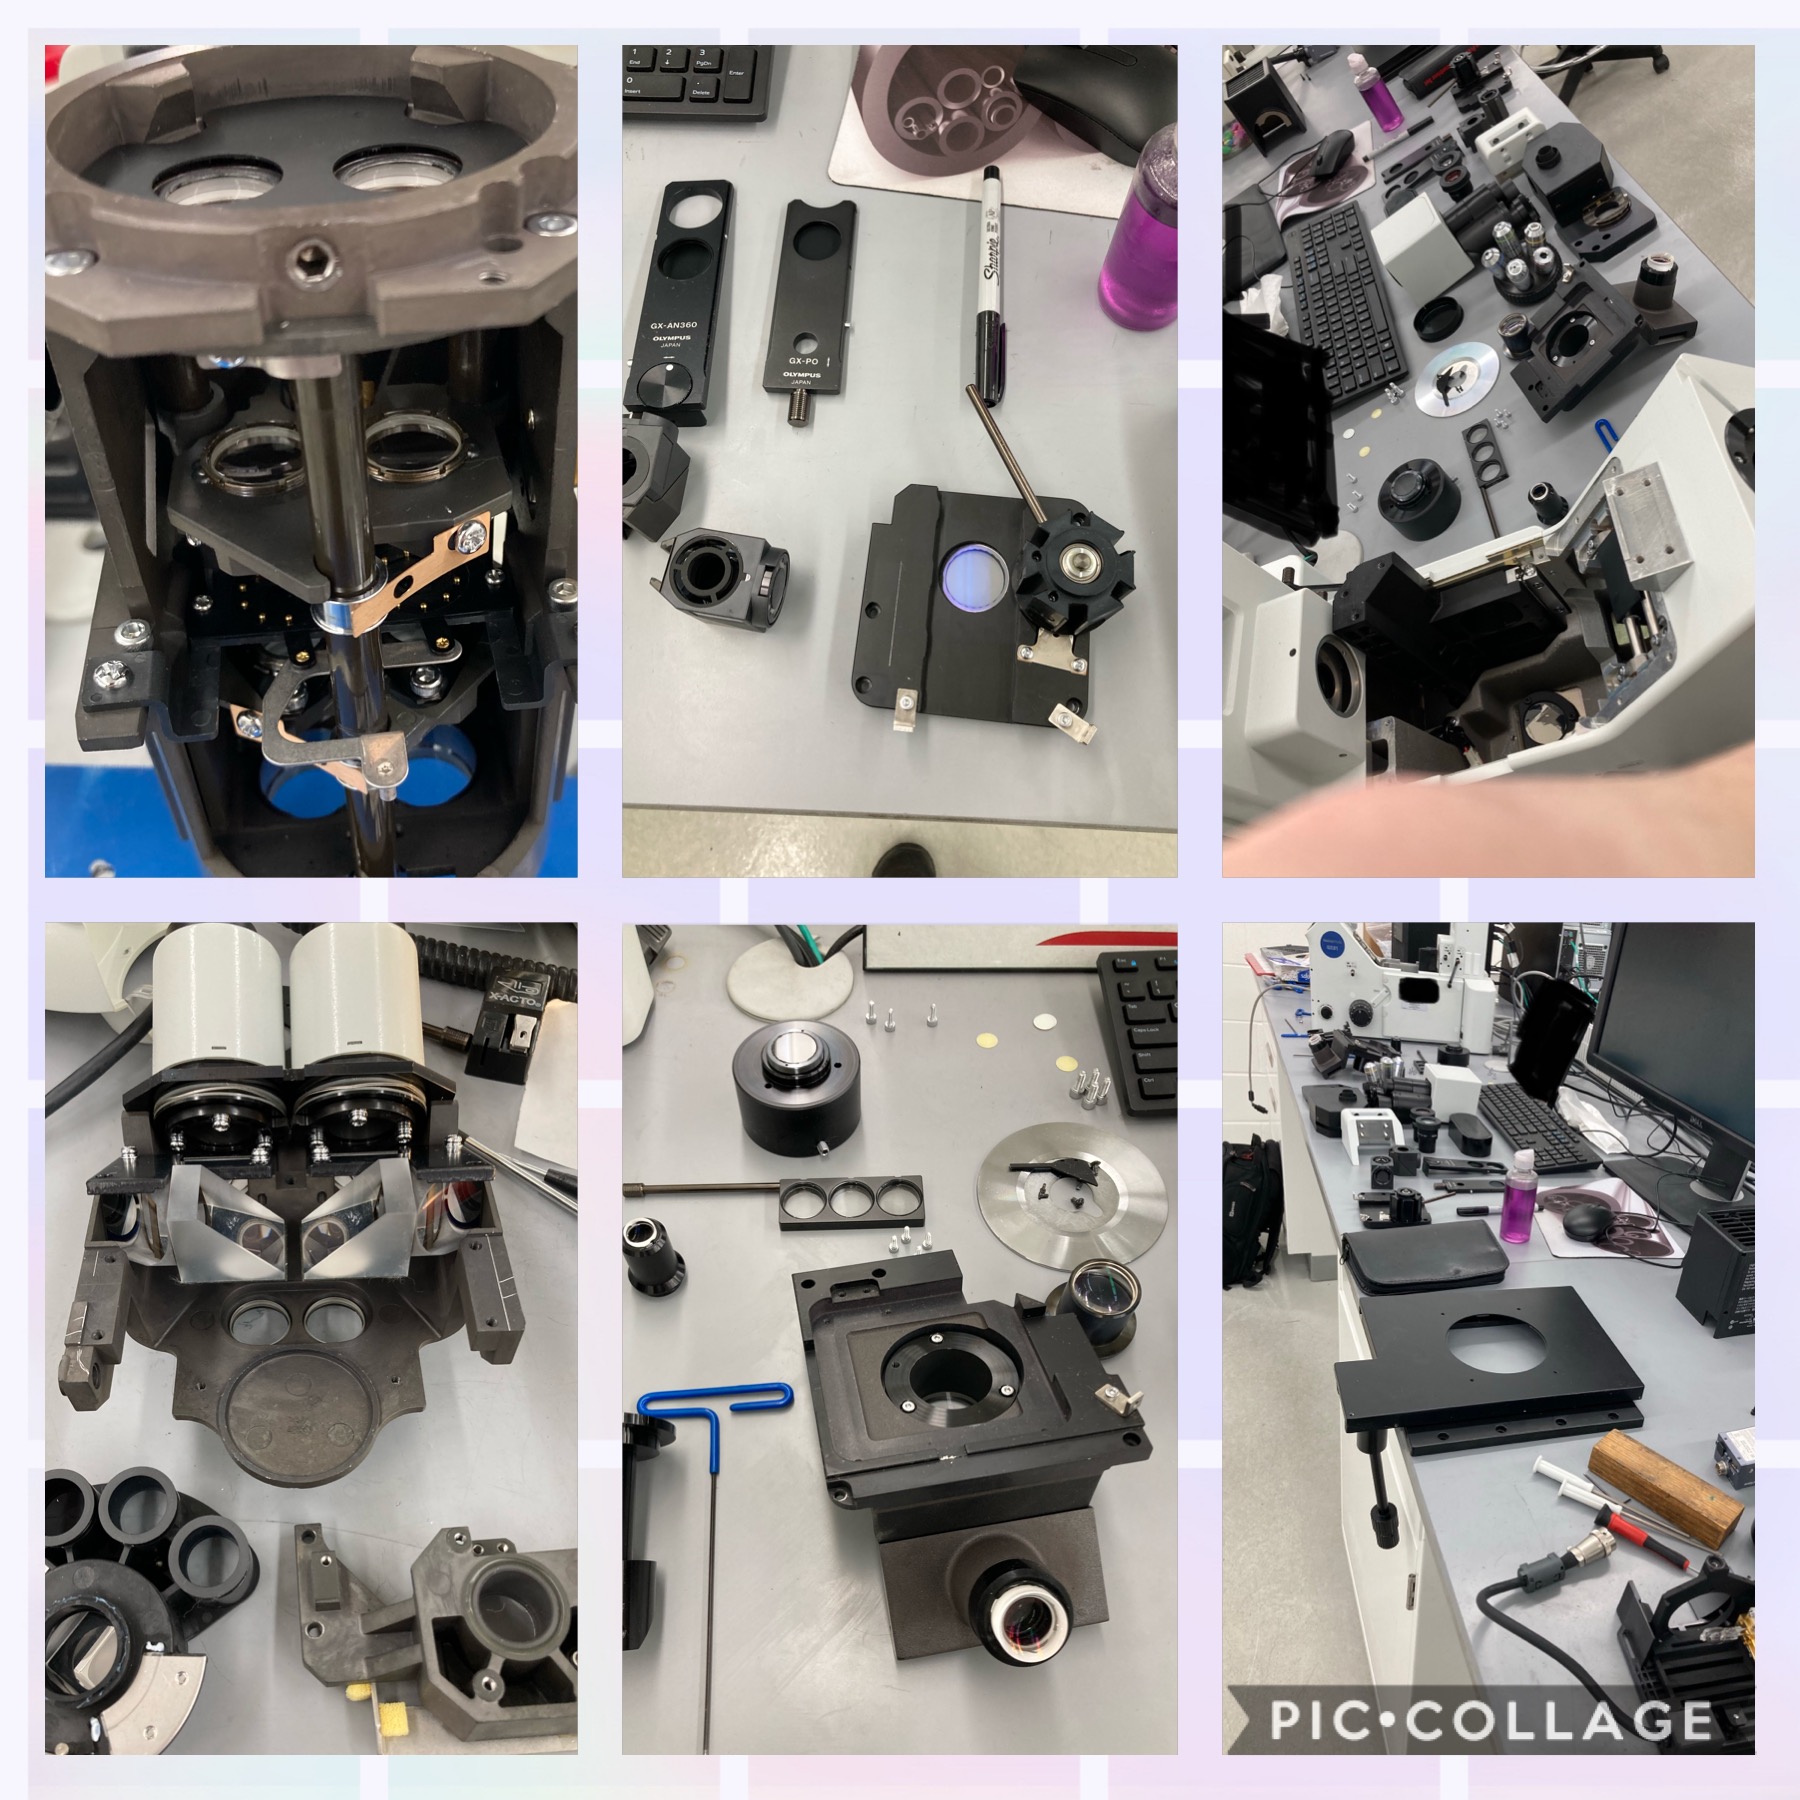 Olympus Stereoscope and Metallograph Microscope Profiler Comparator Linear Stage Cleaning and Calibration Accredited to 17025 Michigan, Ohio, Indiana, New York